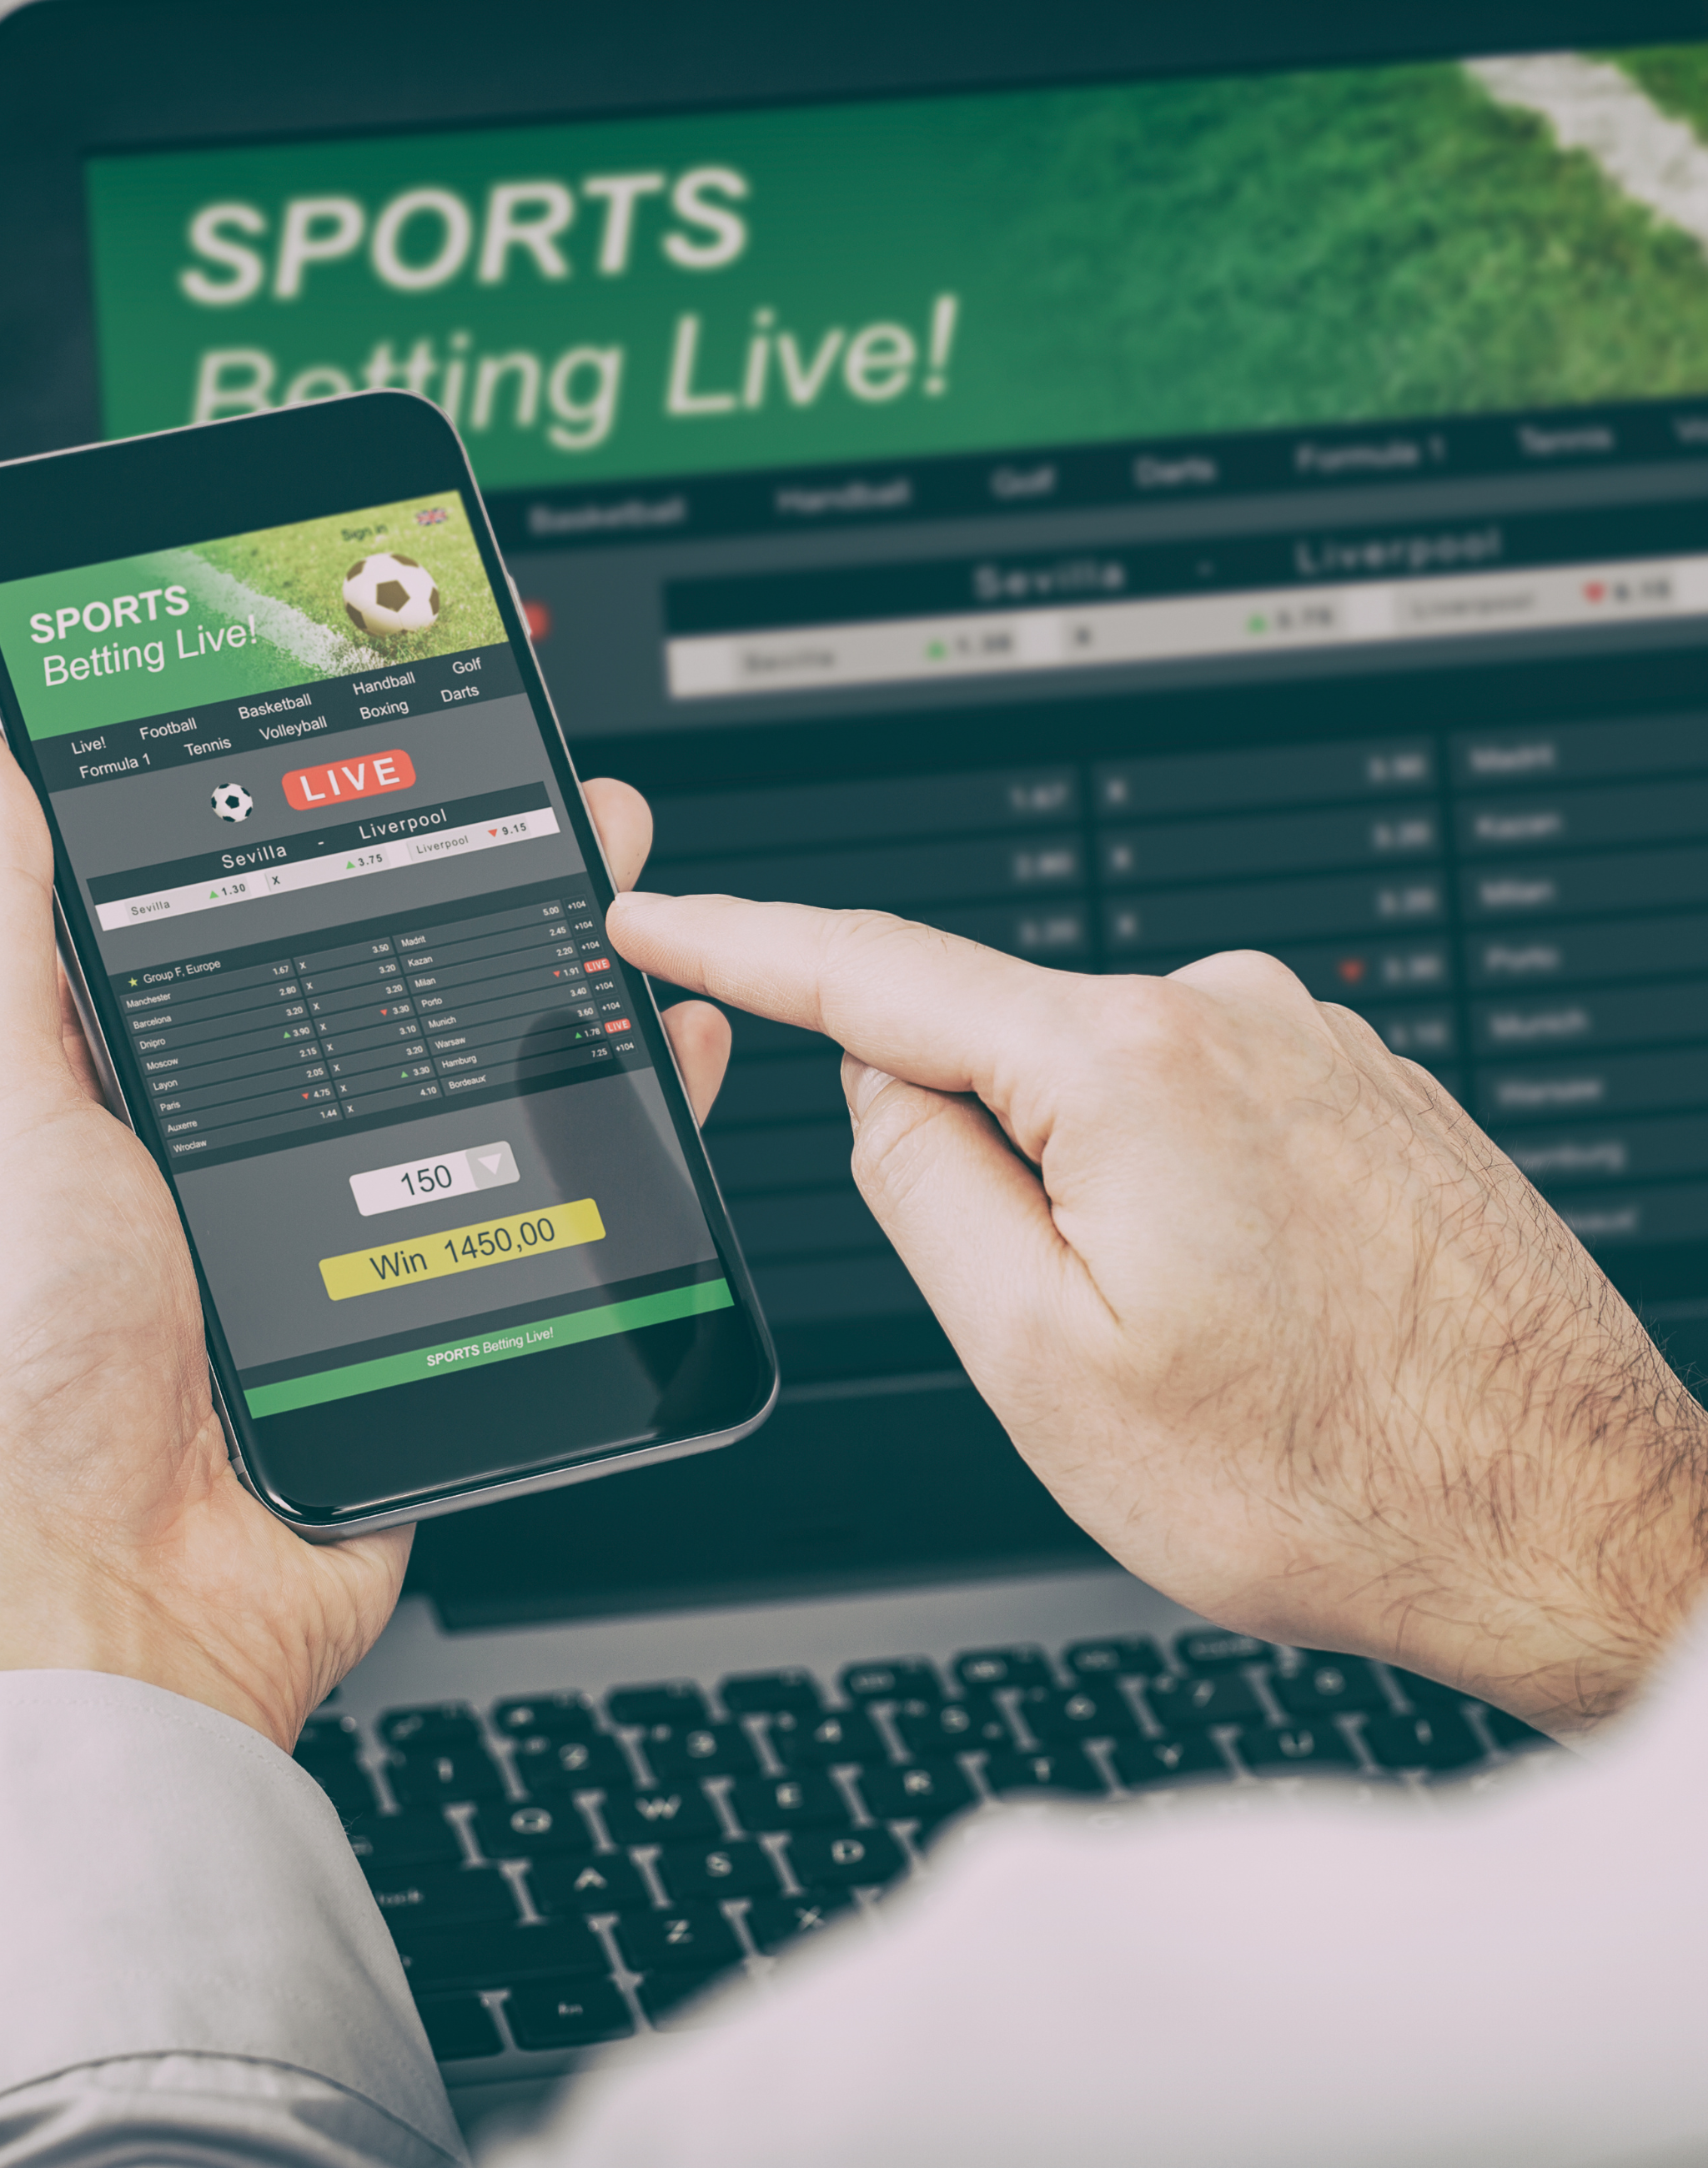 Building outstanding customer service in the betting and gaming industry requires a combination of key strategies tailored to the unique needs and challenges of the industry. Here are some approaches to consider: